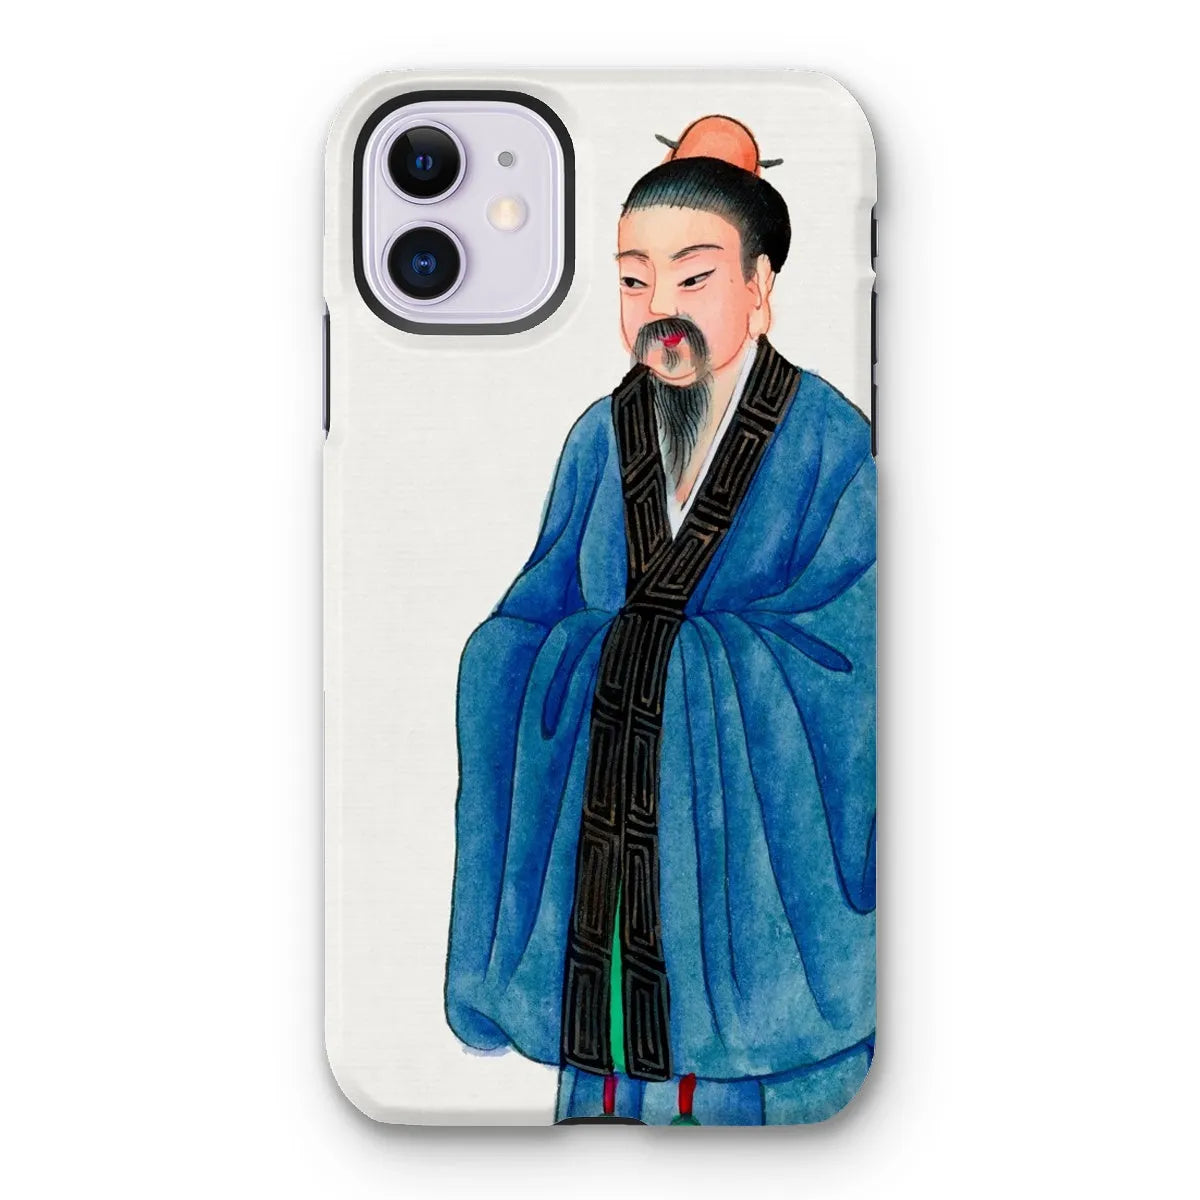 Grand Master - Chinese Buddhist Aesthetic Art Phone Case - Iphone 11 / Matte - Mobile Phone Cases - Aesthetic Art